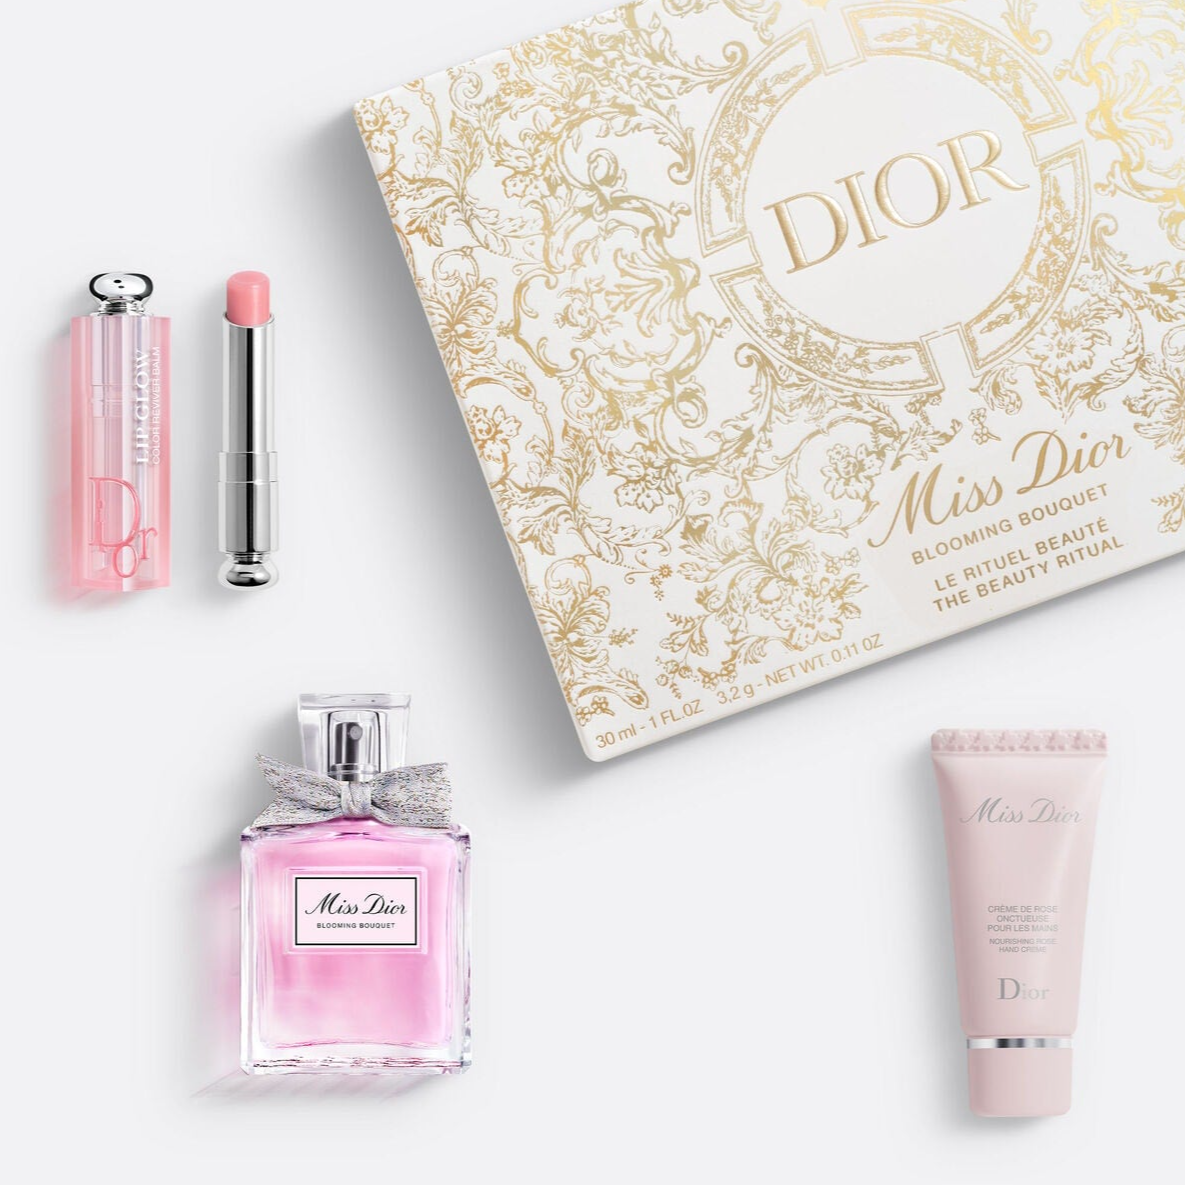 Miss Dior Blooming Bouquet Beauty Ritual Holiday Set